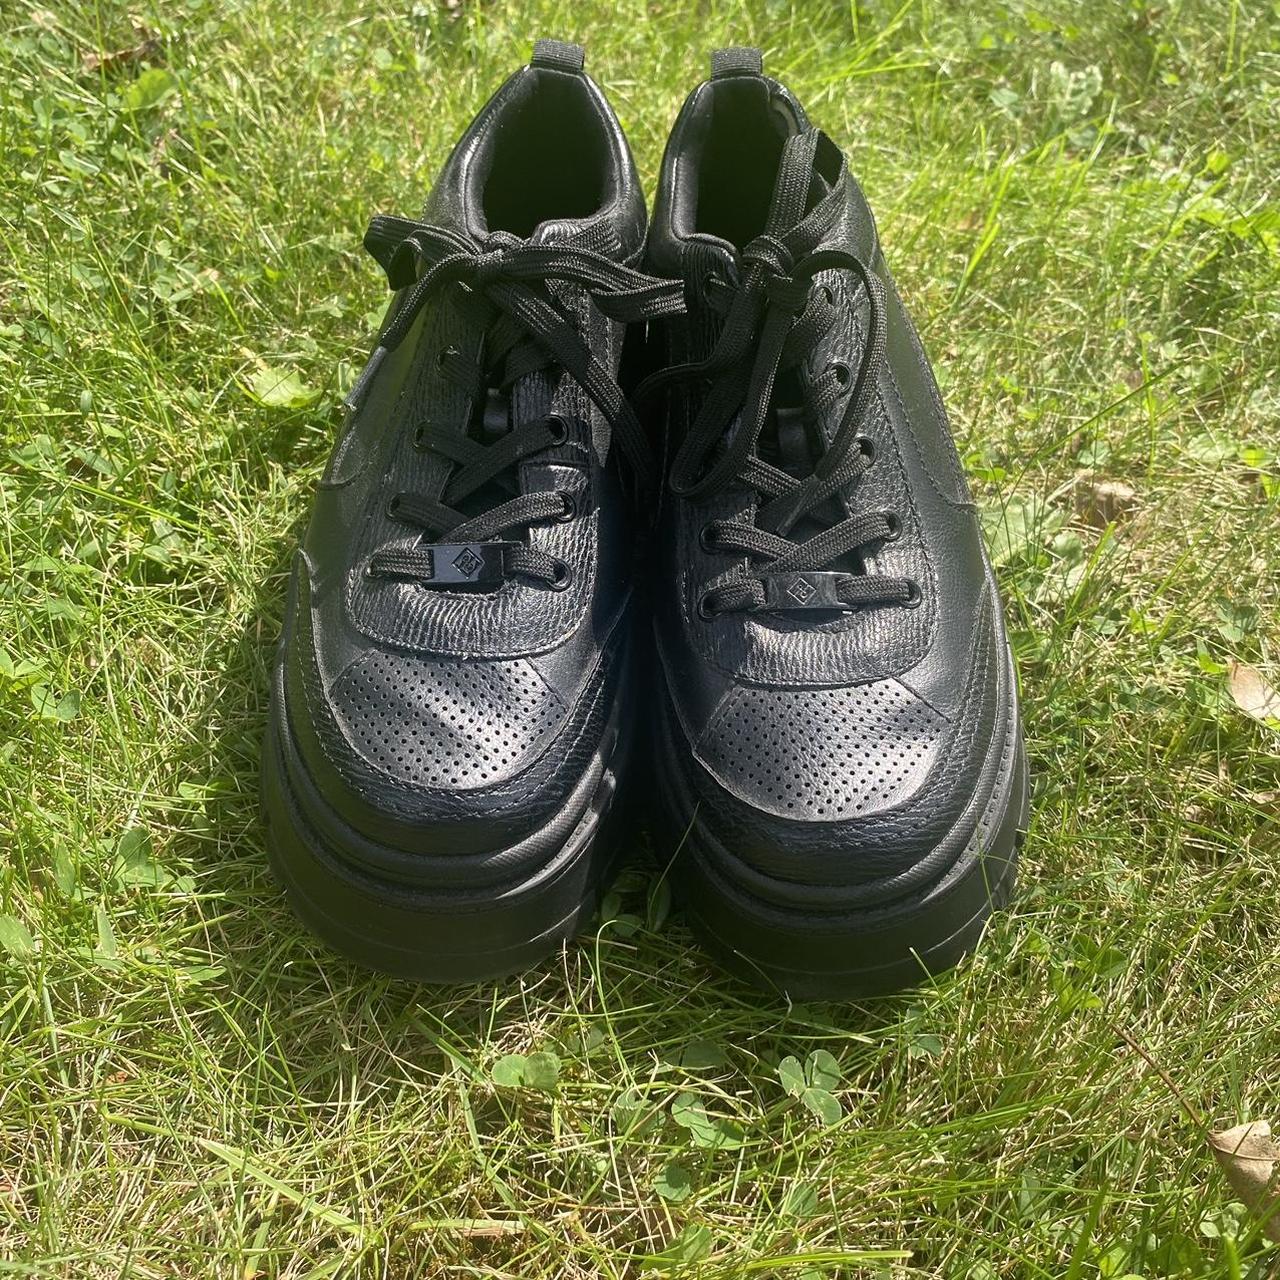 Call it Spring Women's Black Trainers (2)